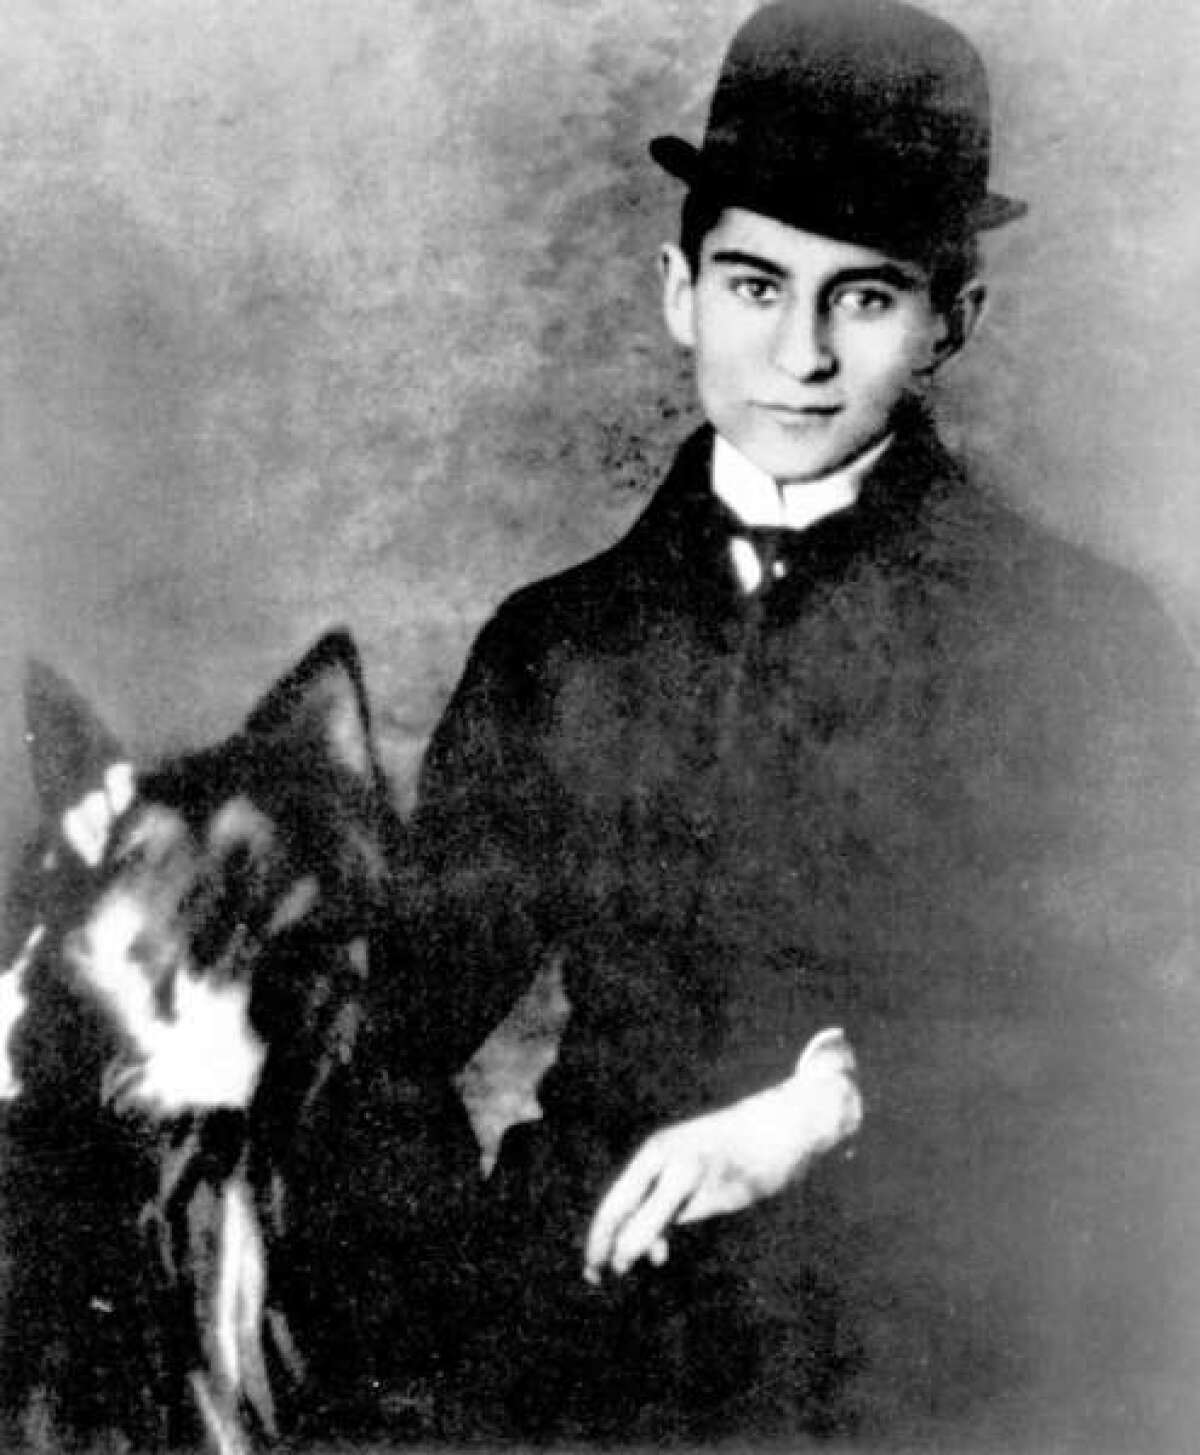 A young Franz Kafka, author of "The Metamorphosis," "The Trial" and other works.